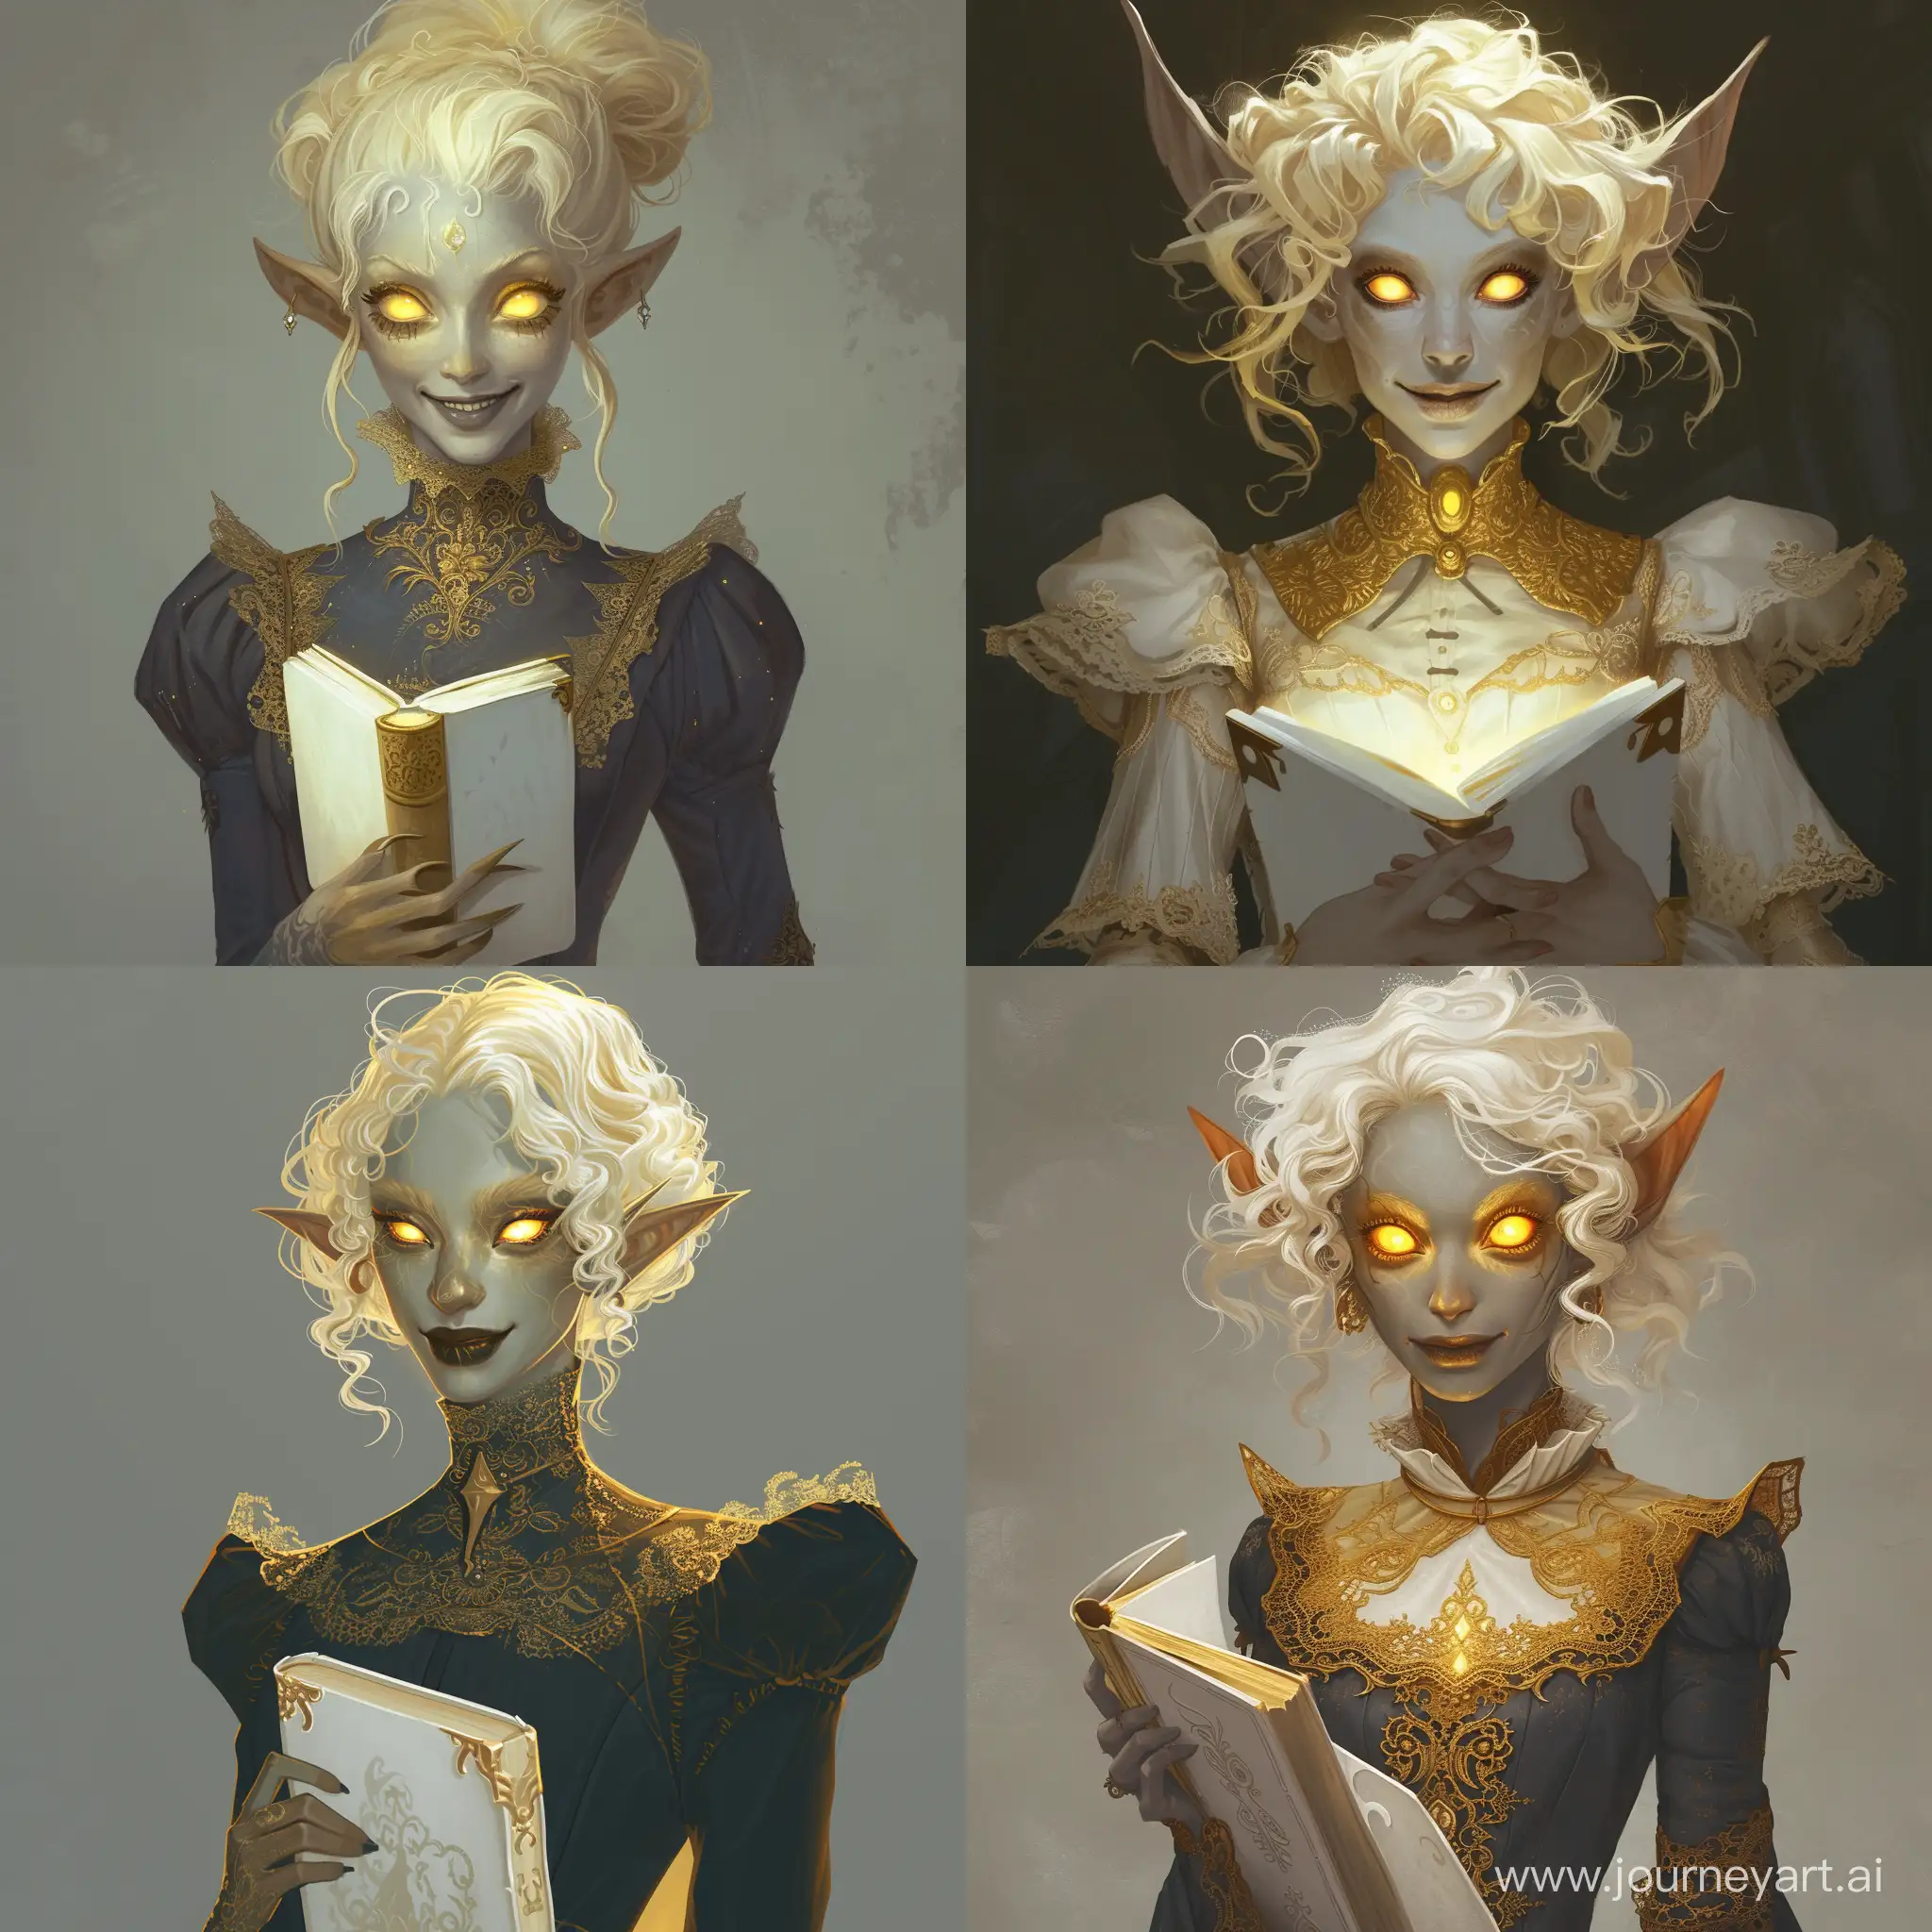 Elf-Witch-with-Pale-Gold-Hair-and-Glowing-Yellow-Eyes-Holding-a-GoldenTrimmed-White-Book